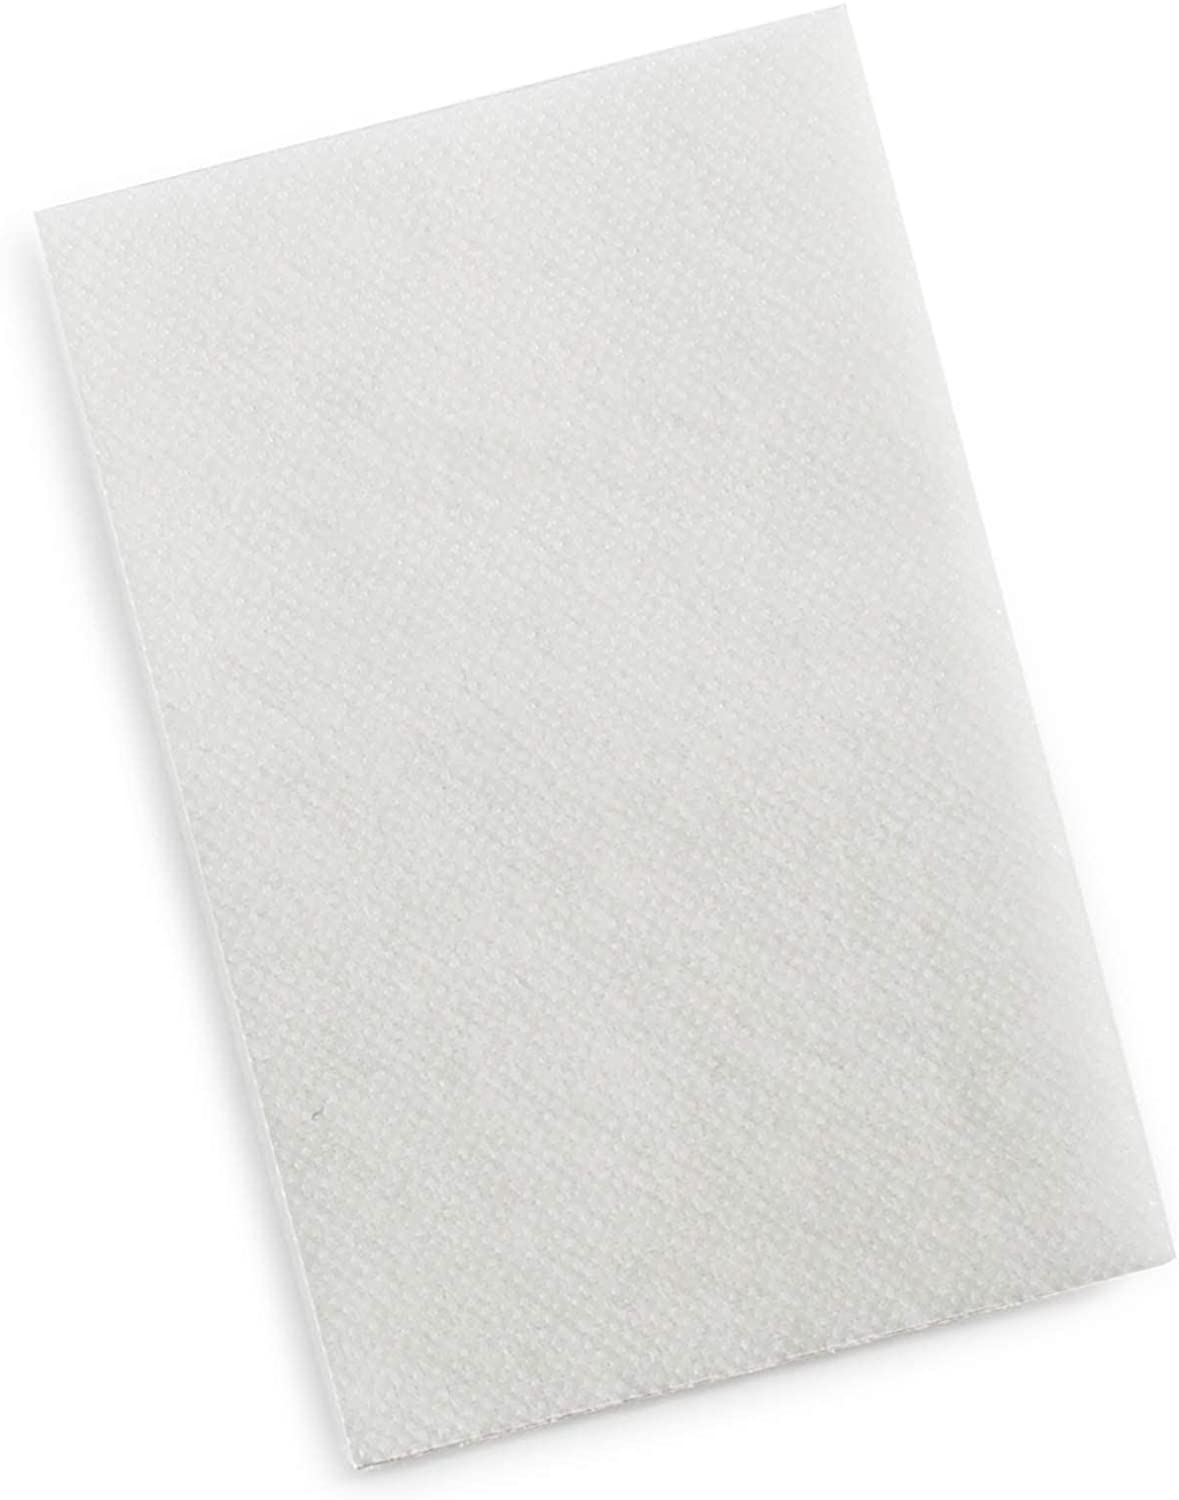 Square Sterile Highly Absorbent Non Adherent Pad for Wound Dressing